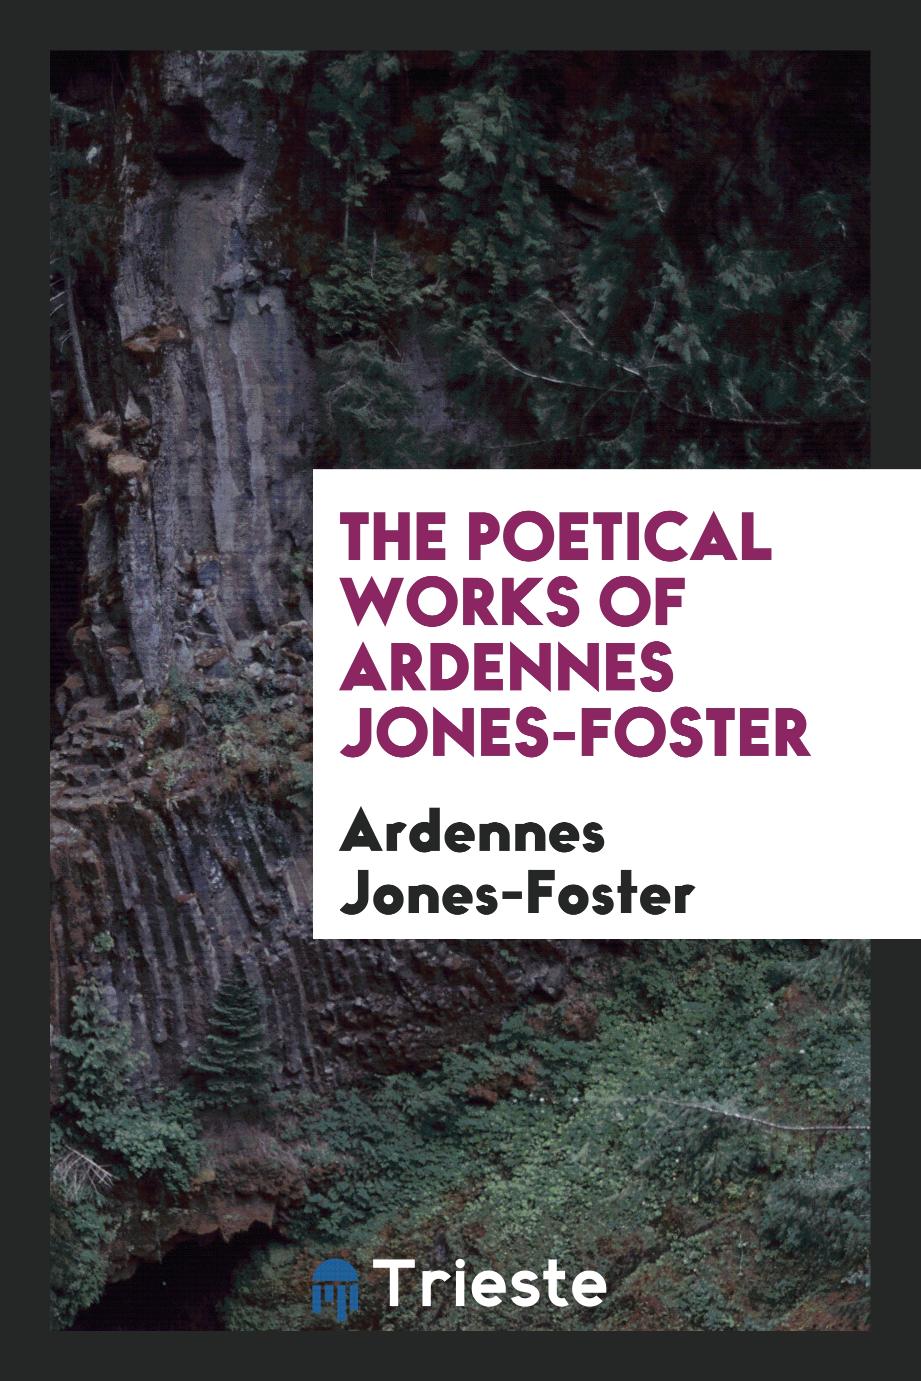 The Poetical Works of Ardennes Jones-Foster